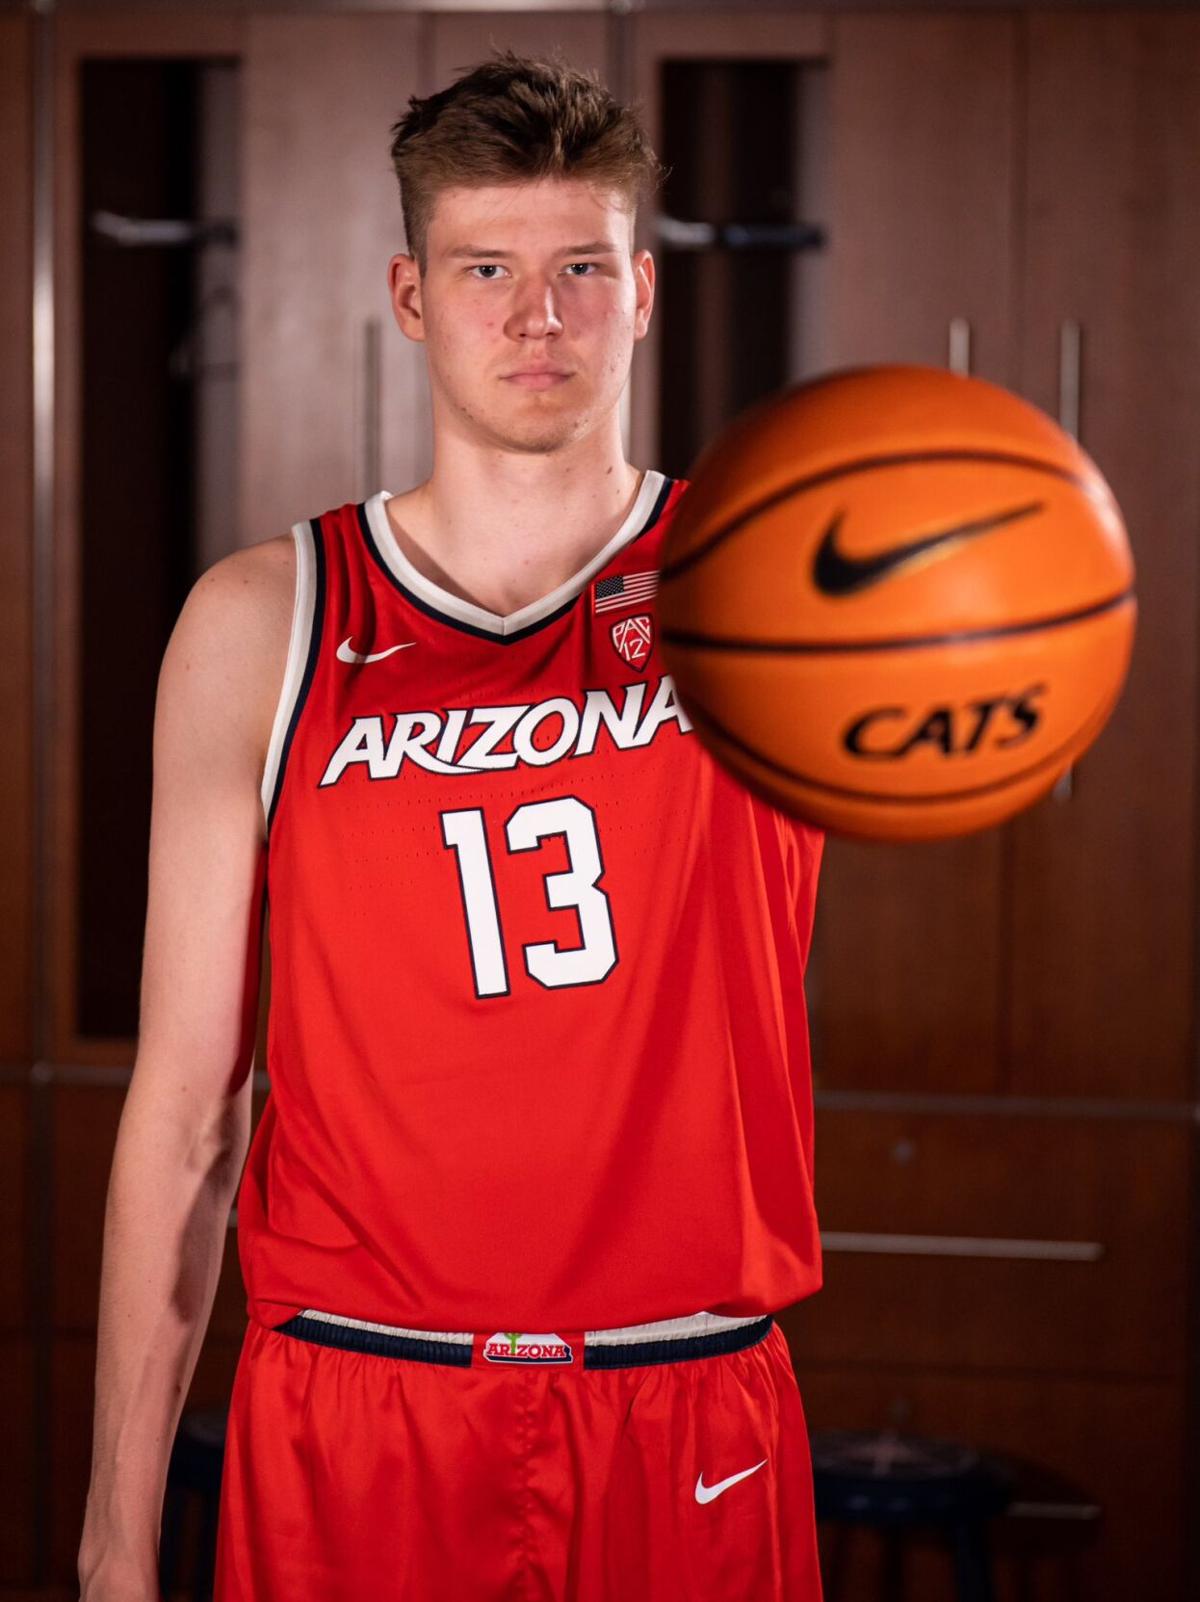 Arizona overpromised and underdelivered with their new uniforms 